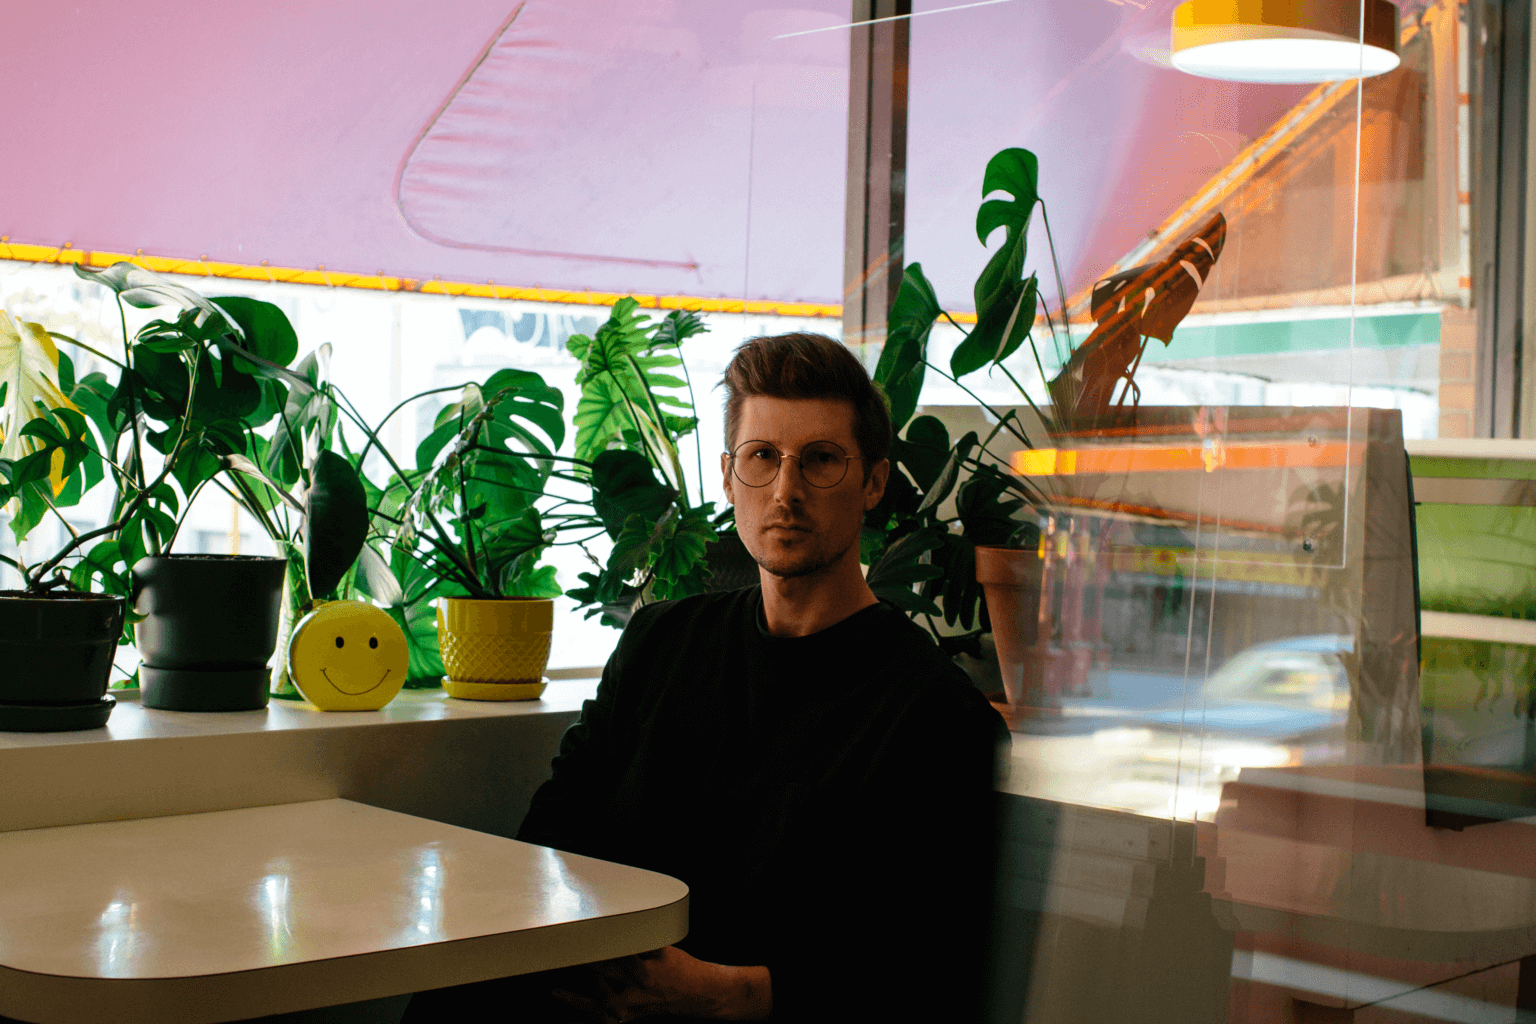 "Swimming" by Teen Daze is Northern Transmissions Song of the Day. The track is off the Vancouver, BC artist's album Interior, out 12/10